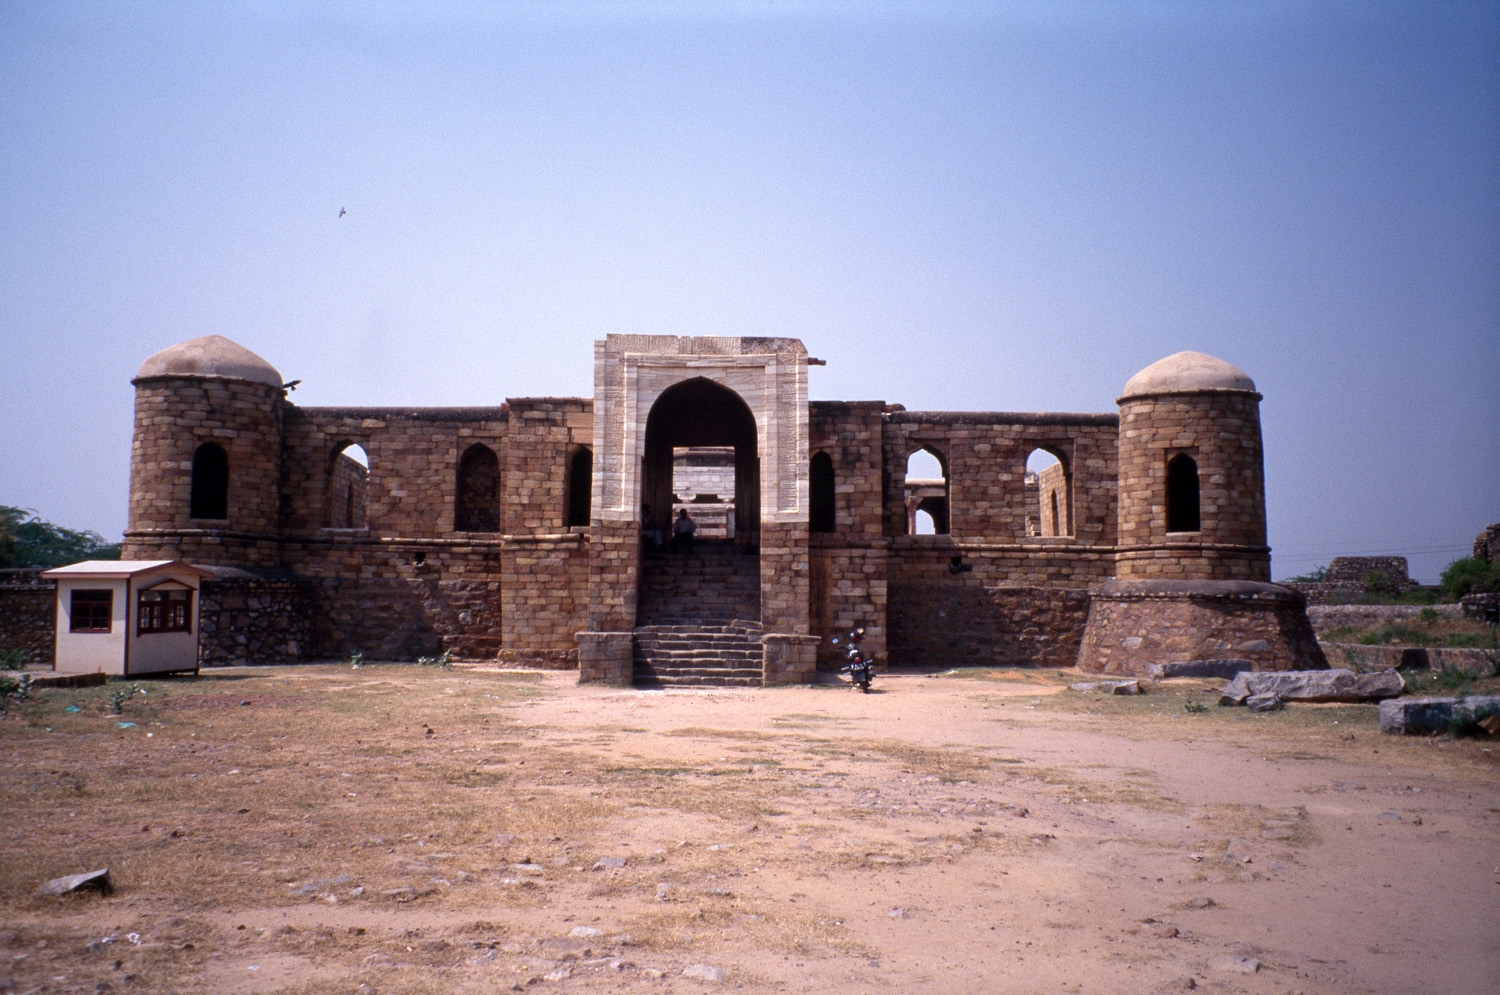 Tomb of Sultan Ghari - Exterior view of tomb enclosure, eastern elevation with gateway